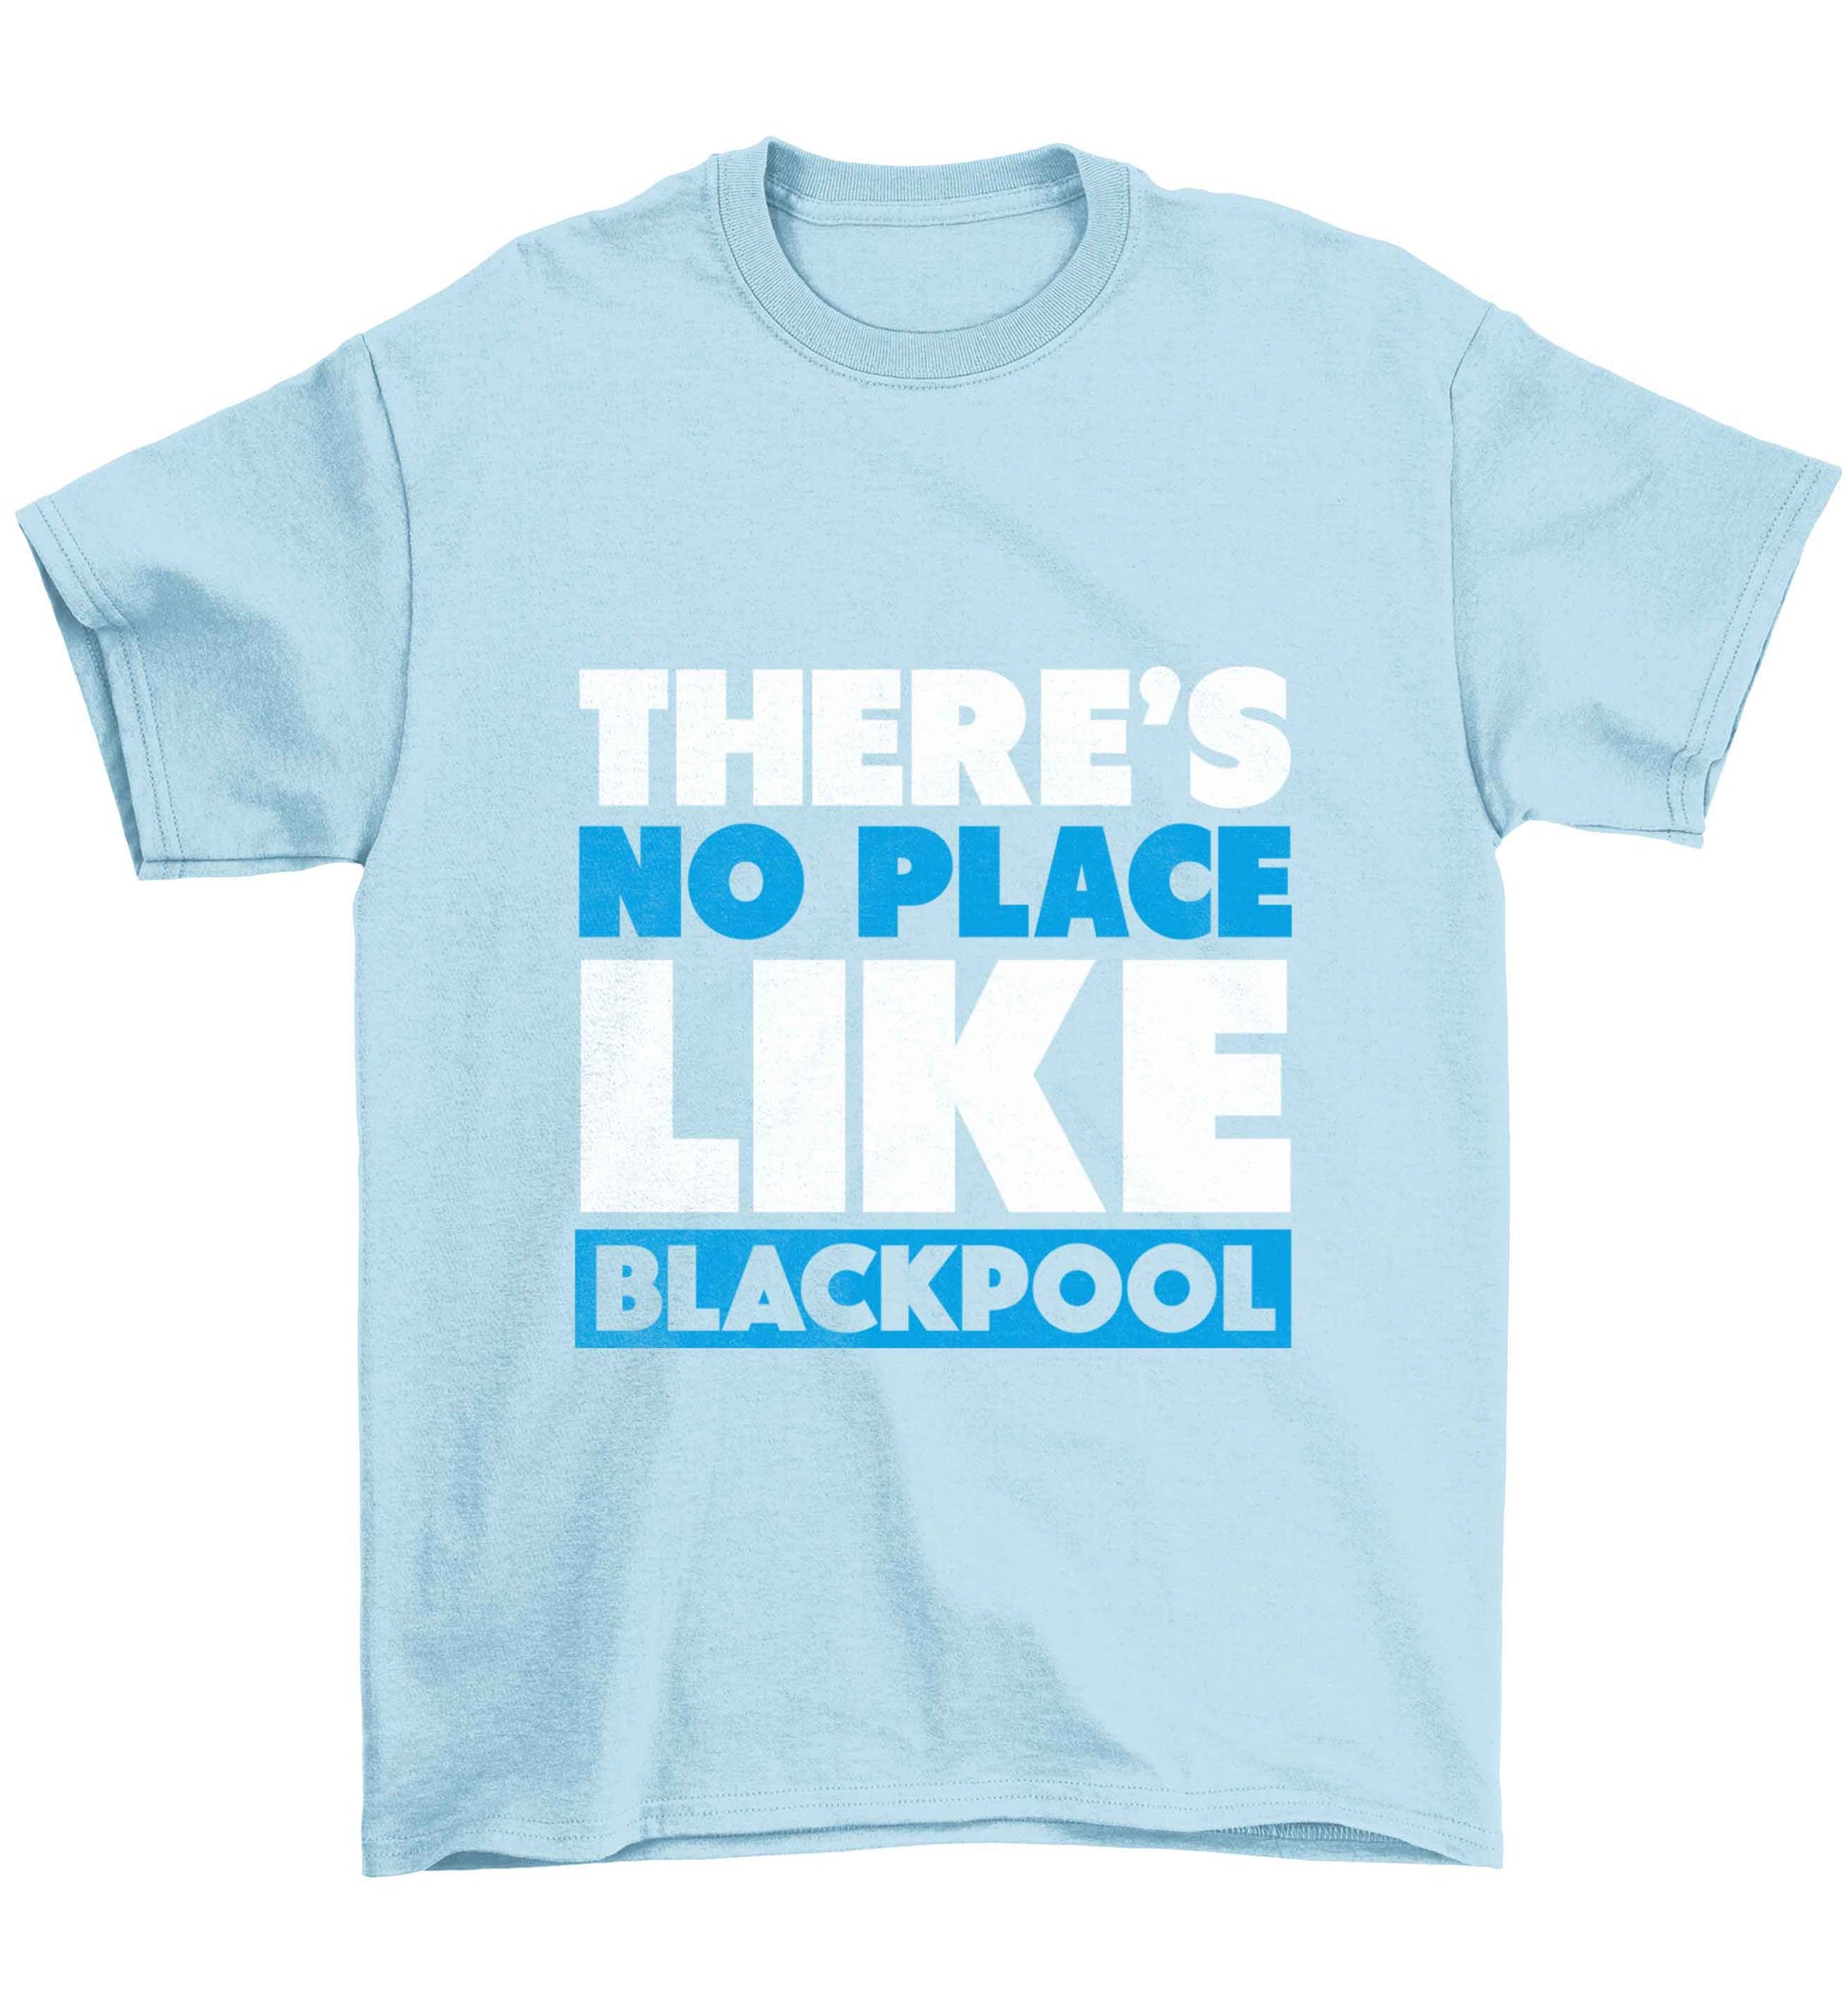 There's no place like Blackpool Children's light blue Tshirt 12-13 Years